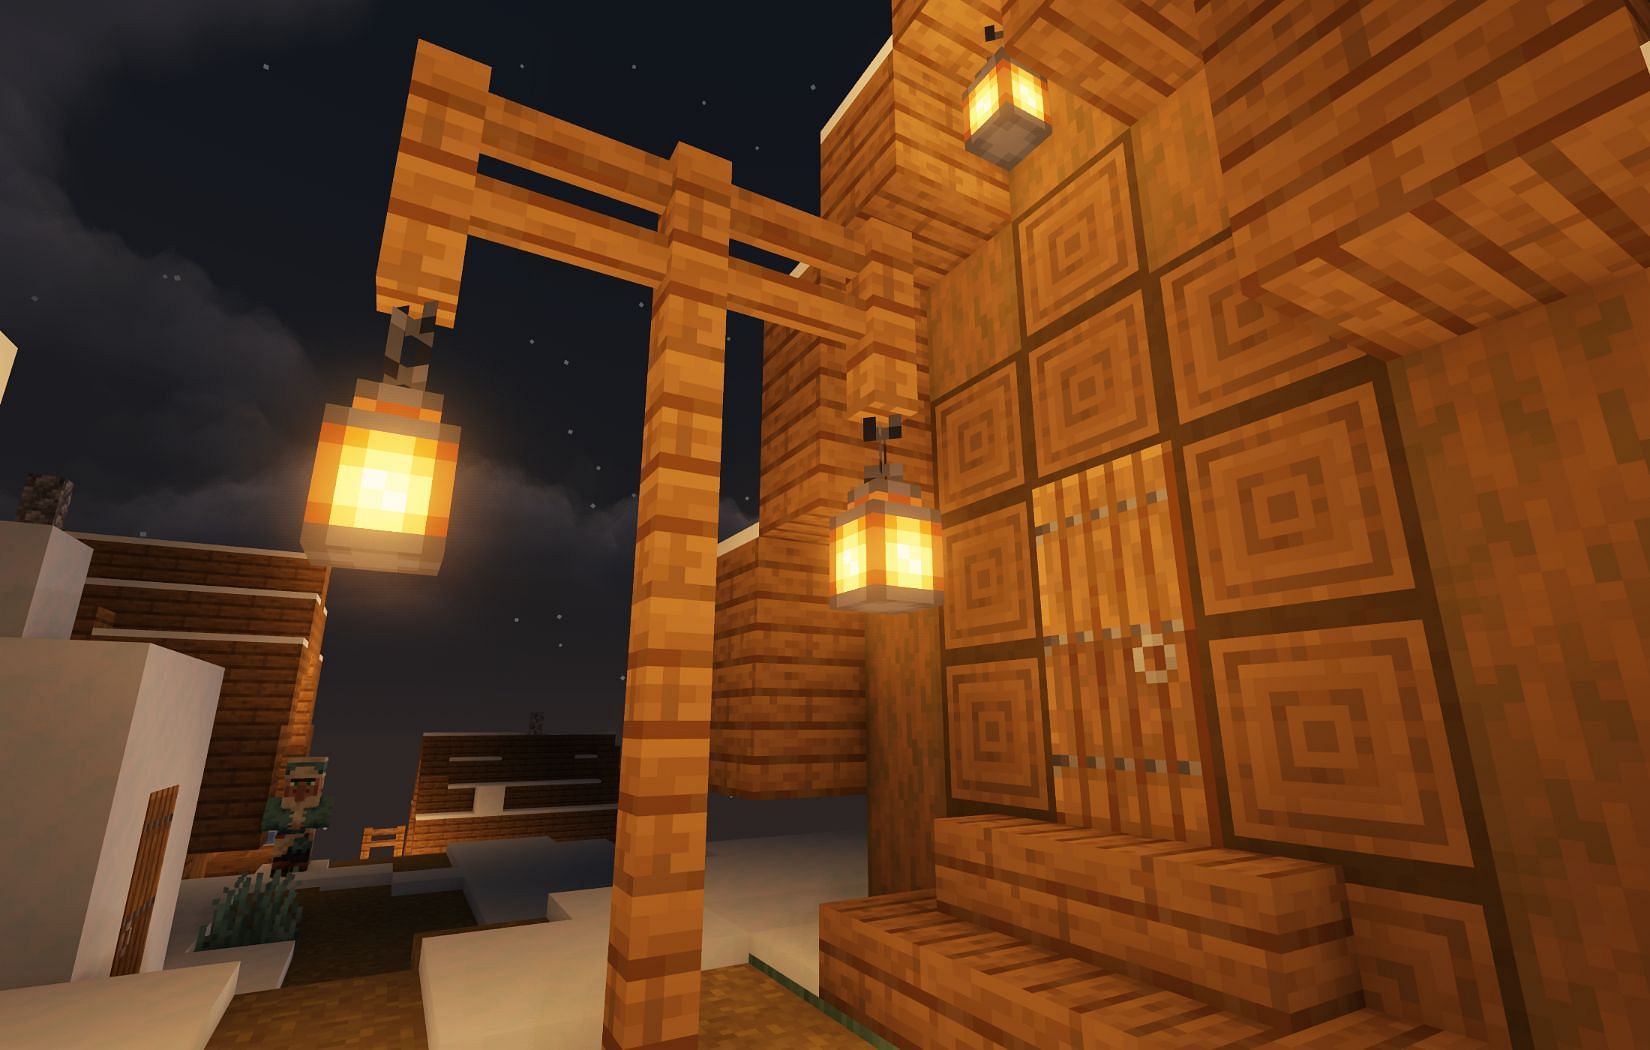 Lanterns are perfect for giving a rustic ambiance (Image via Mojang)